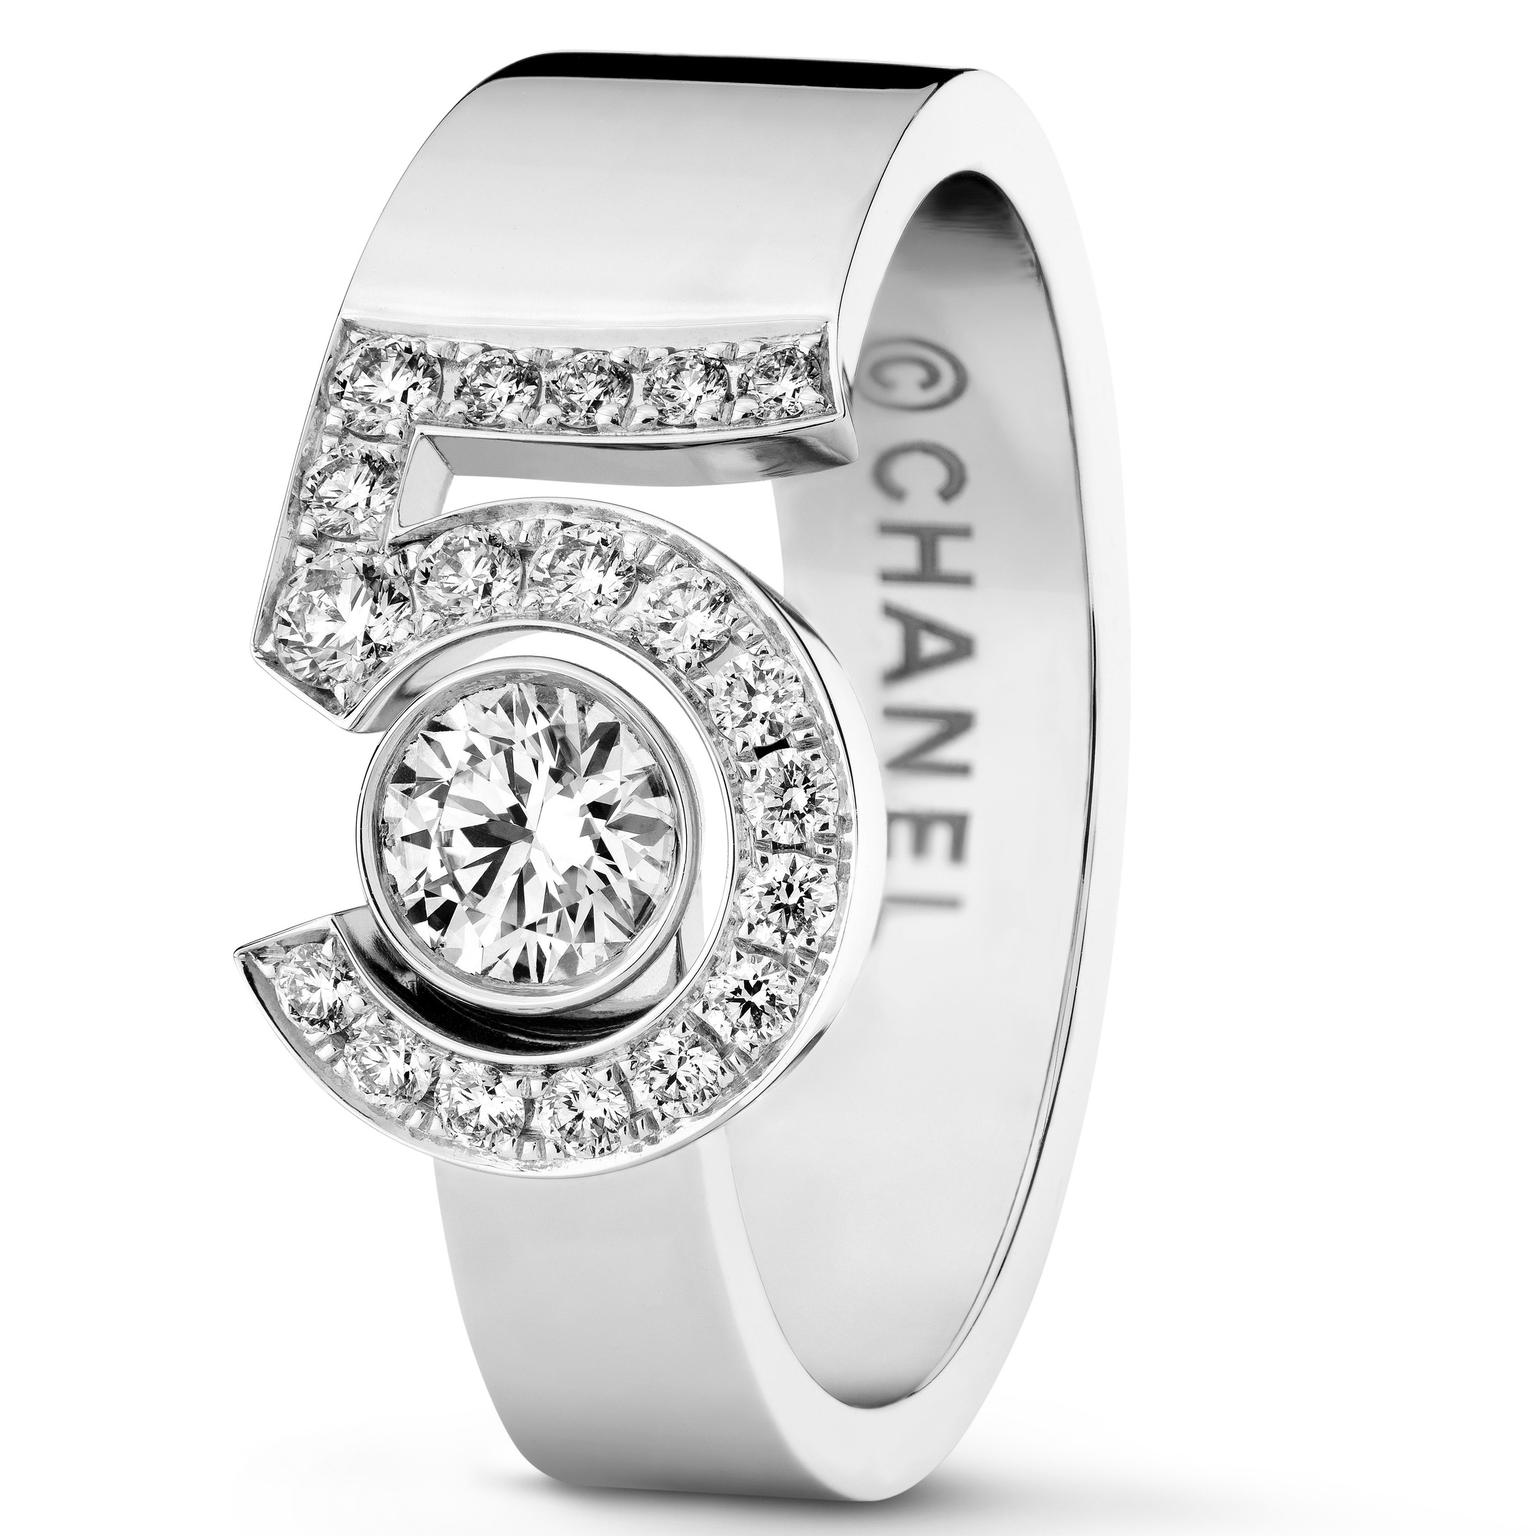 Eternal No5 ring by Chanel